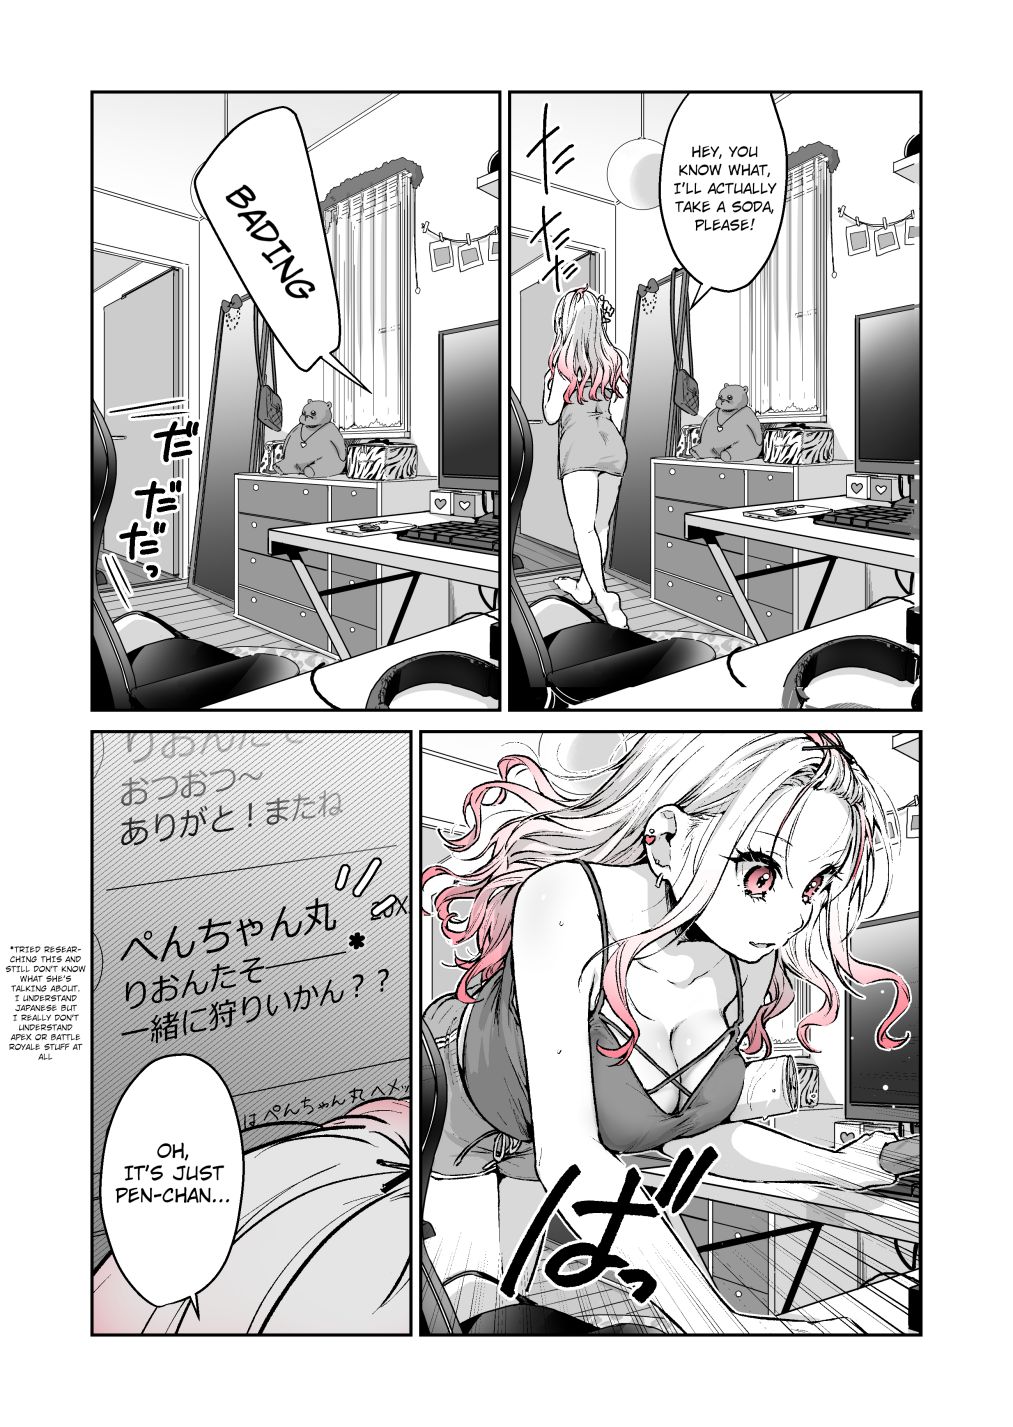 Want to Be Praised by a Gal Gamer - chapter 13 - #4